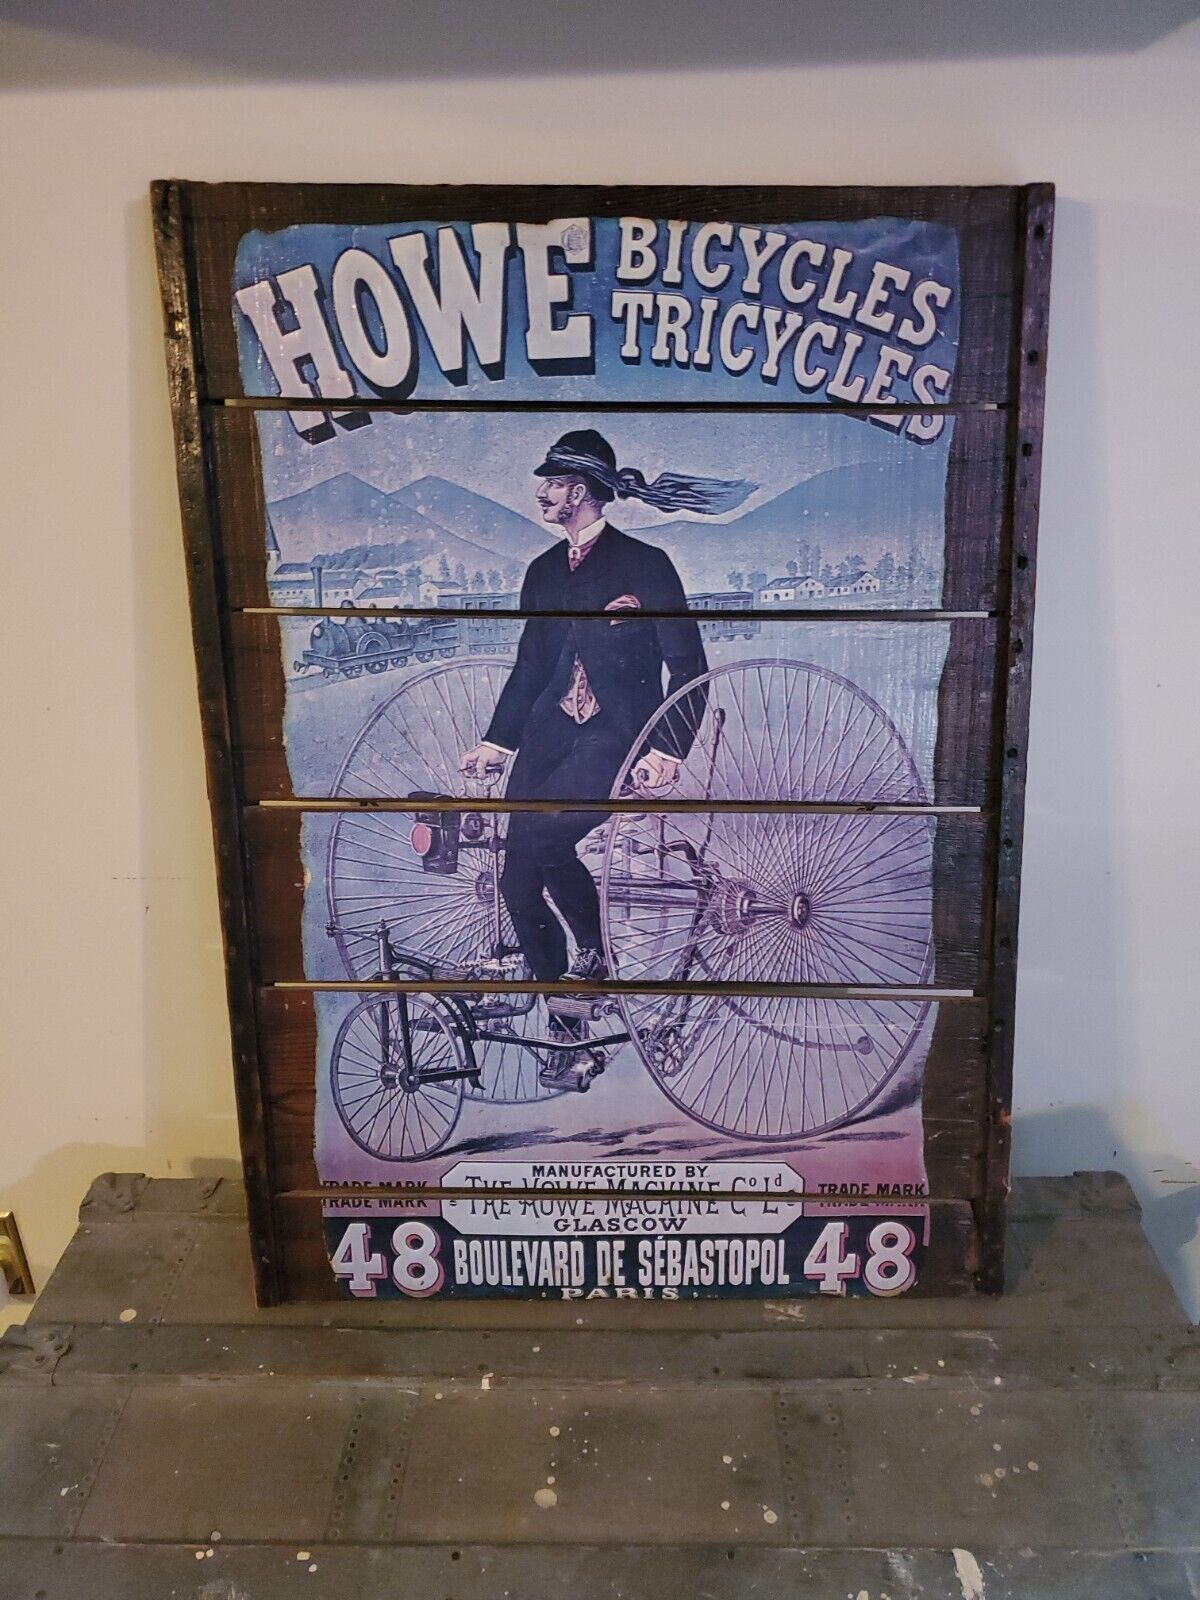 Howe Bicycles Tricycles Wooden Plank Artwork